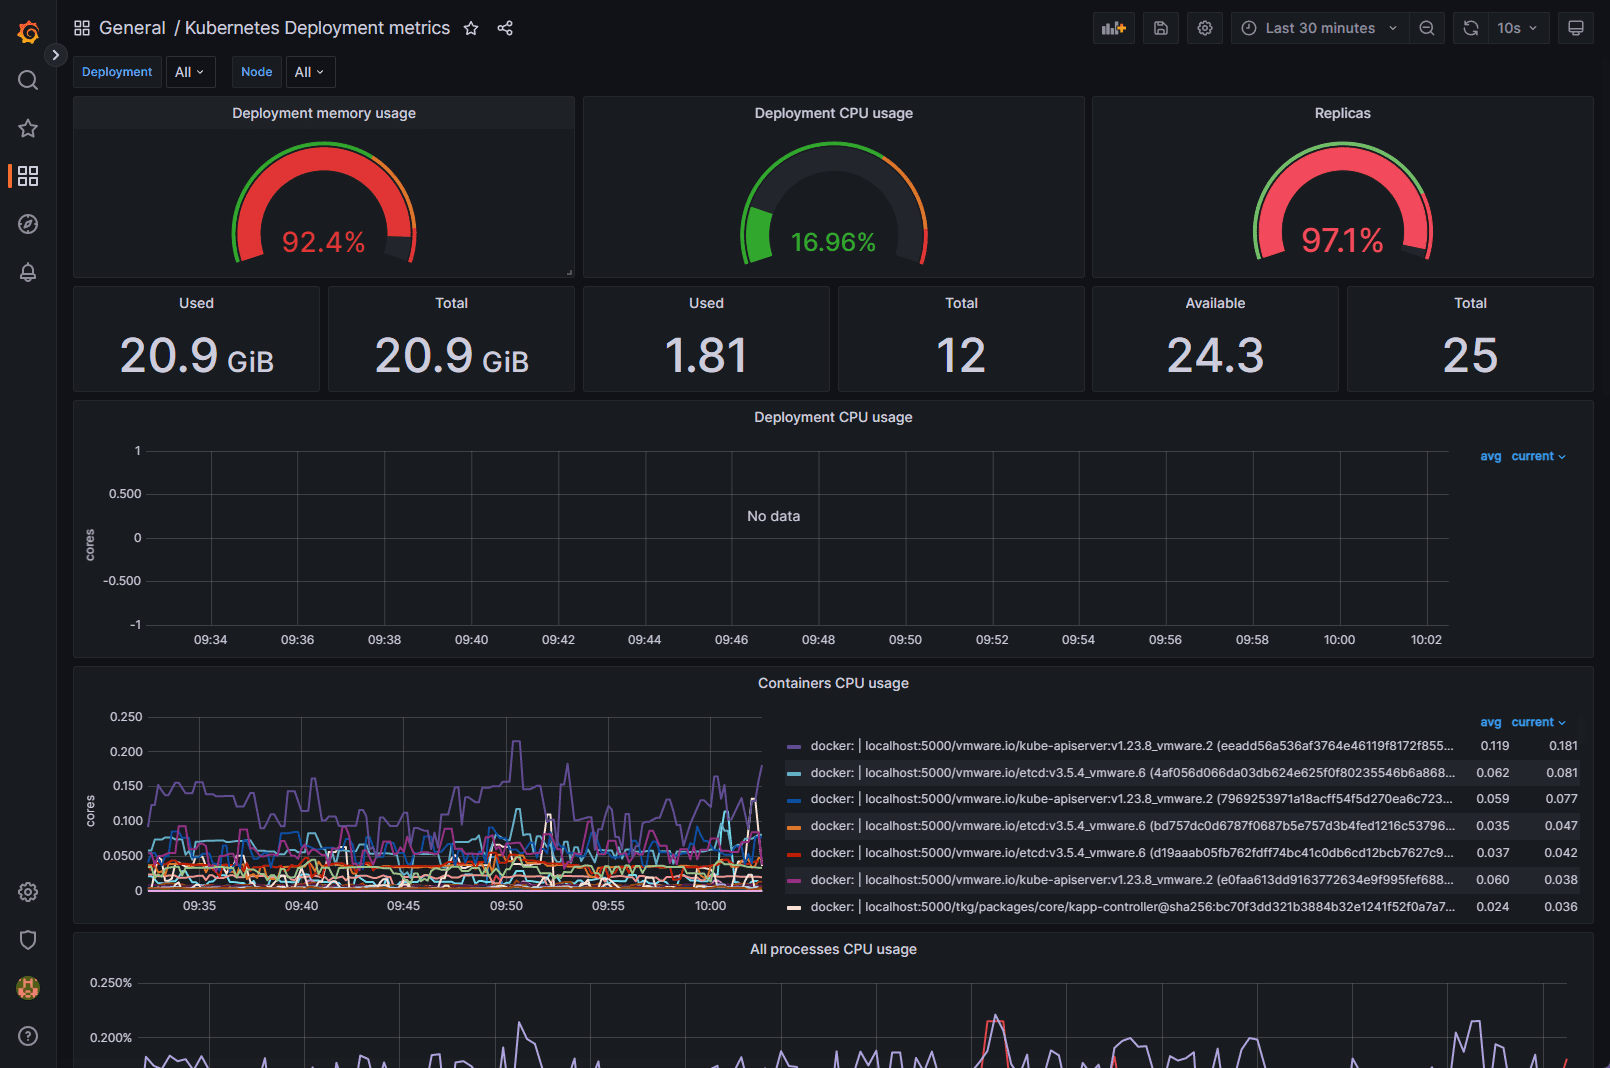 Prometheus and Grafana are excellent Kubernetes monitoring tools